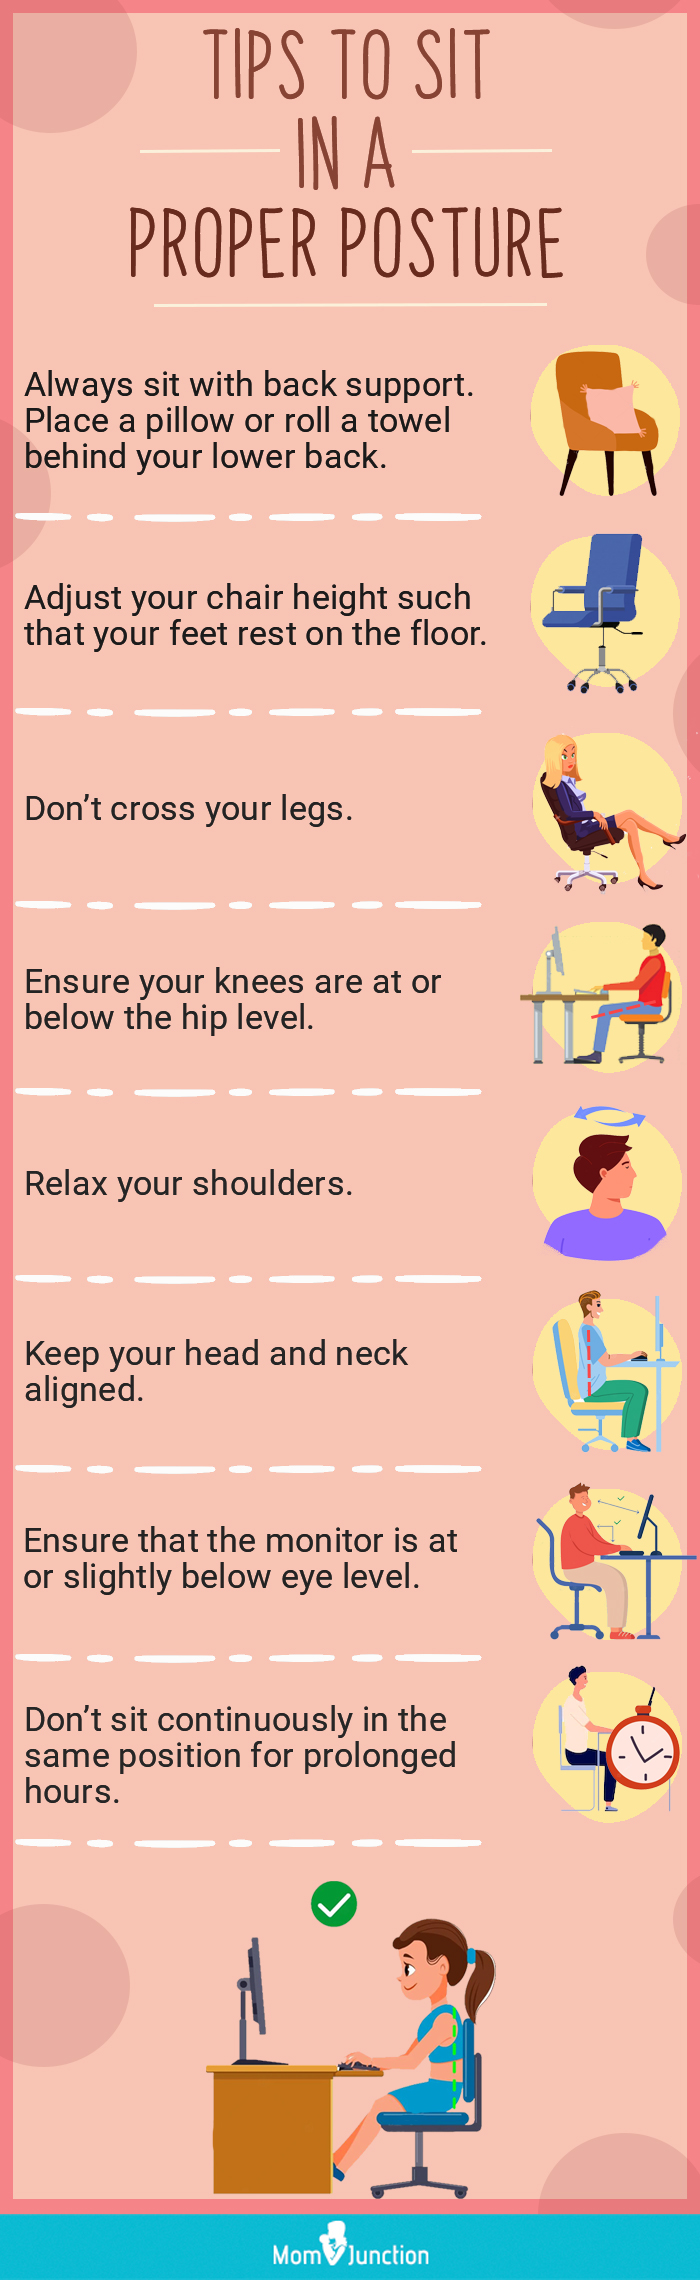 https://cdn2.momjunction.com/wp-content/uploads/2020/10/Infographic-How-To-Sit-In-A-Chair-To-Prevent-Back-Pain.jpg